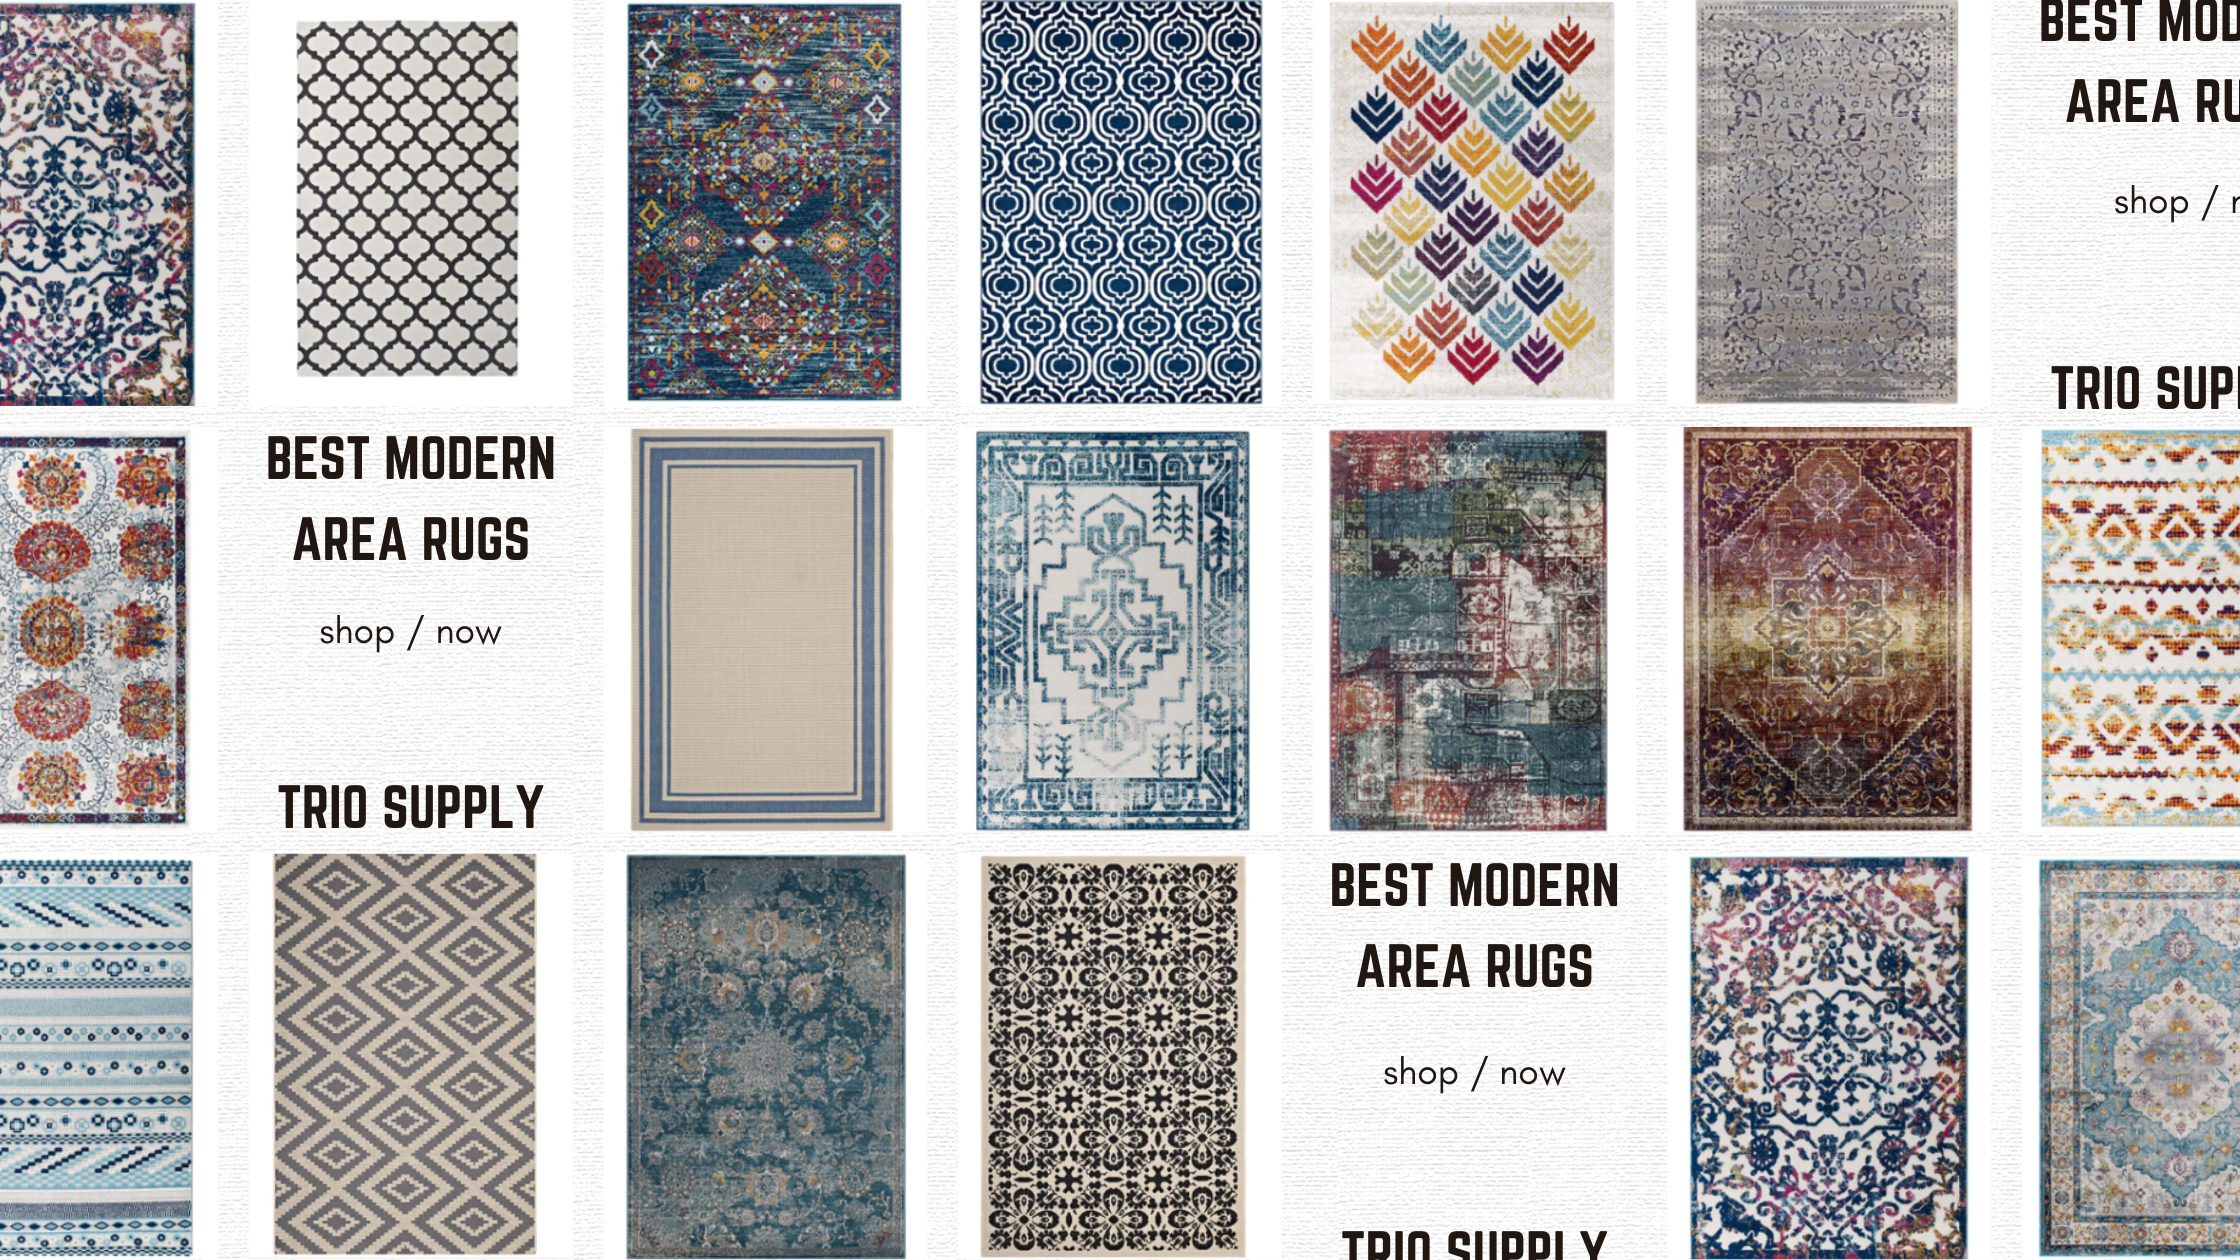 Best Modern Area Rugs To Decorate Your Room: 8x10, 5x8, Outdoor and More!